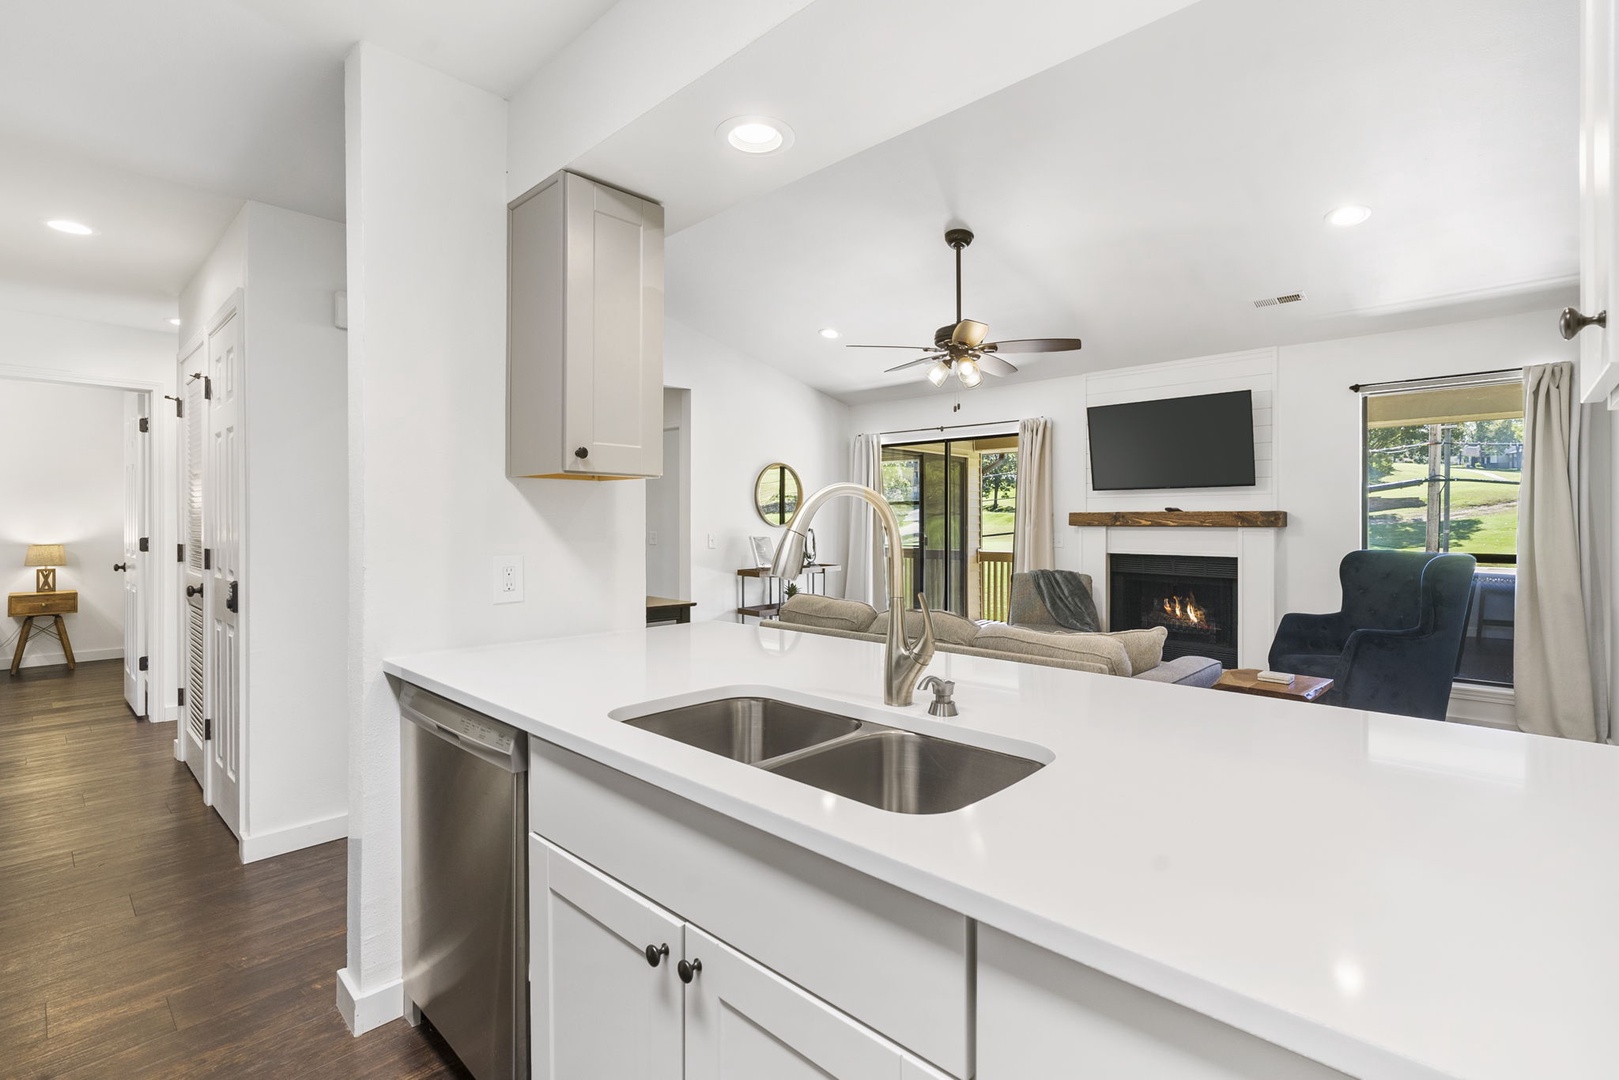 The updated kitchen offers ample storage space & all the comforts of home